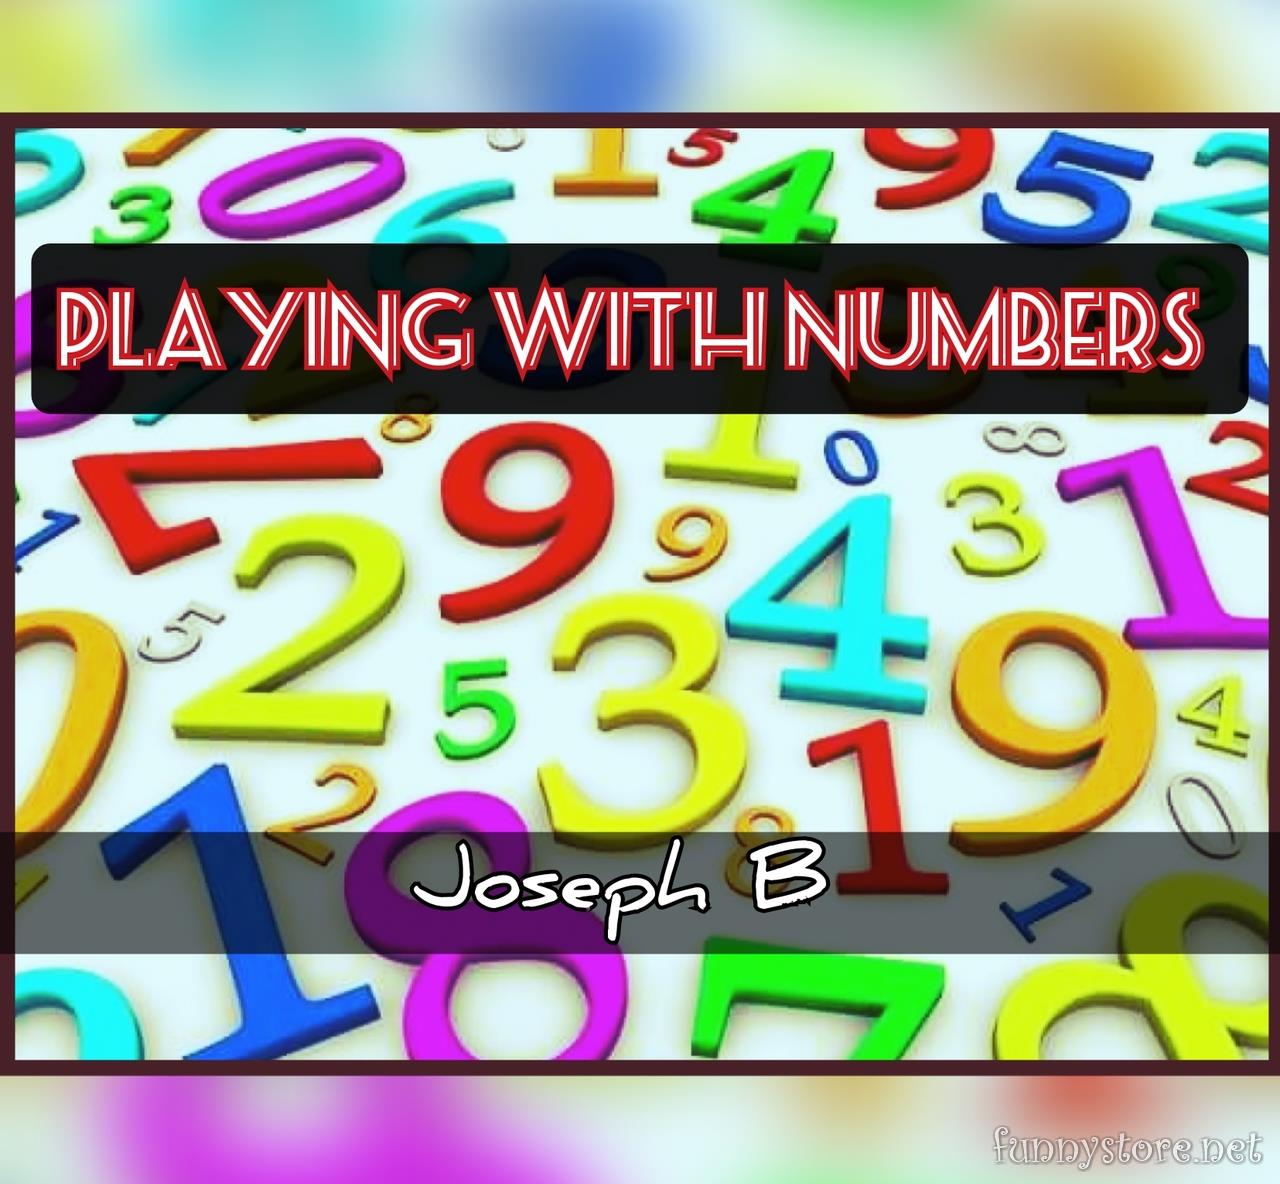 Joseph B. - PLAYING WITH NUMBERS